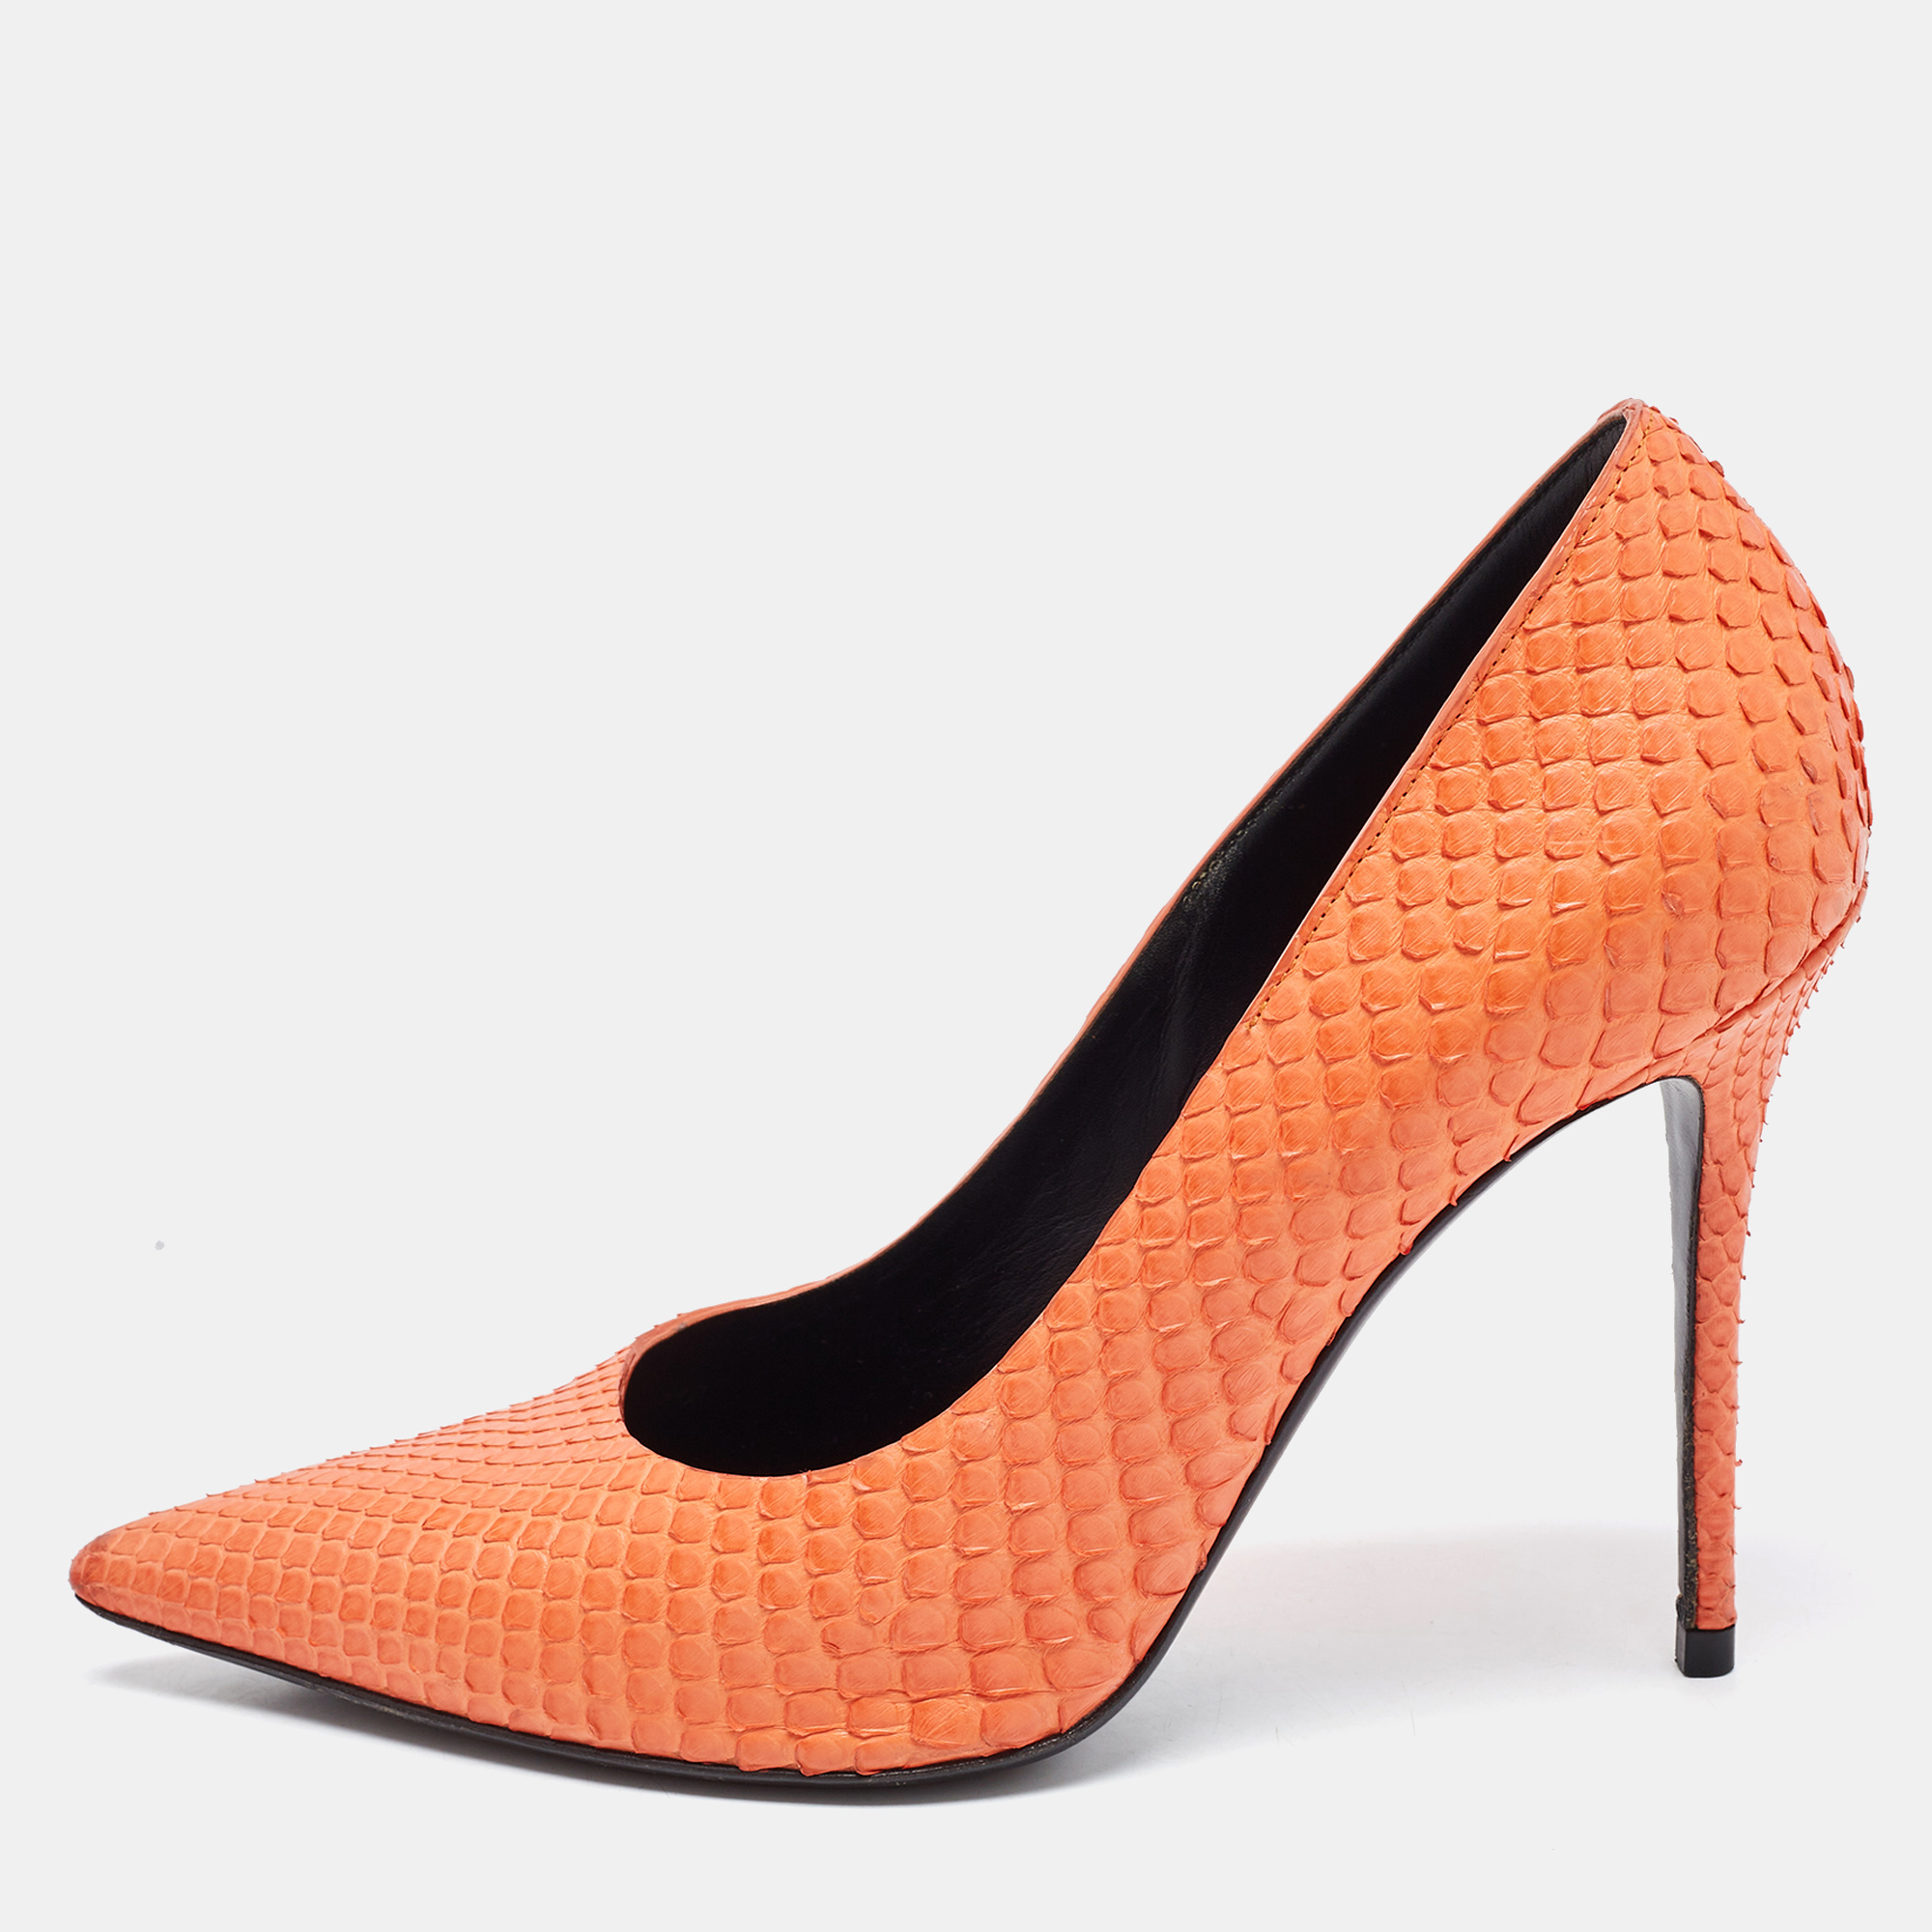 Pre-owned Celine Orange Python Leather Pointed Toe Pumps Size 37